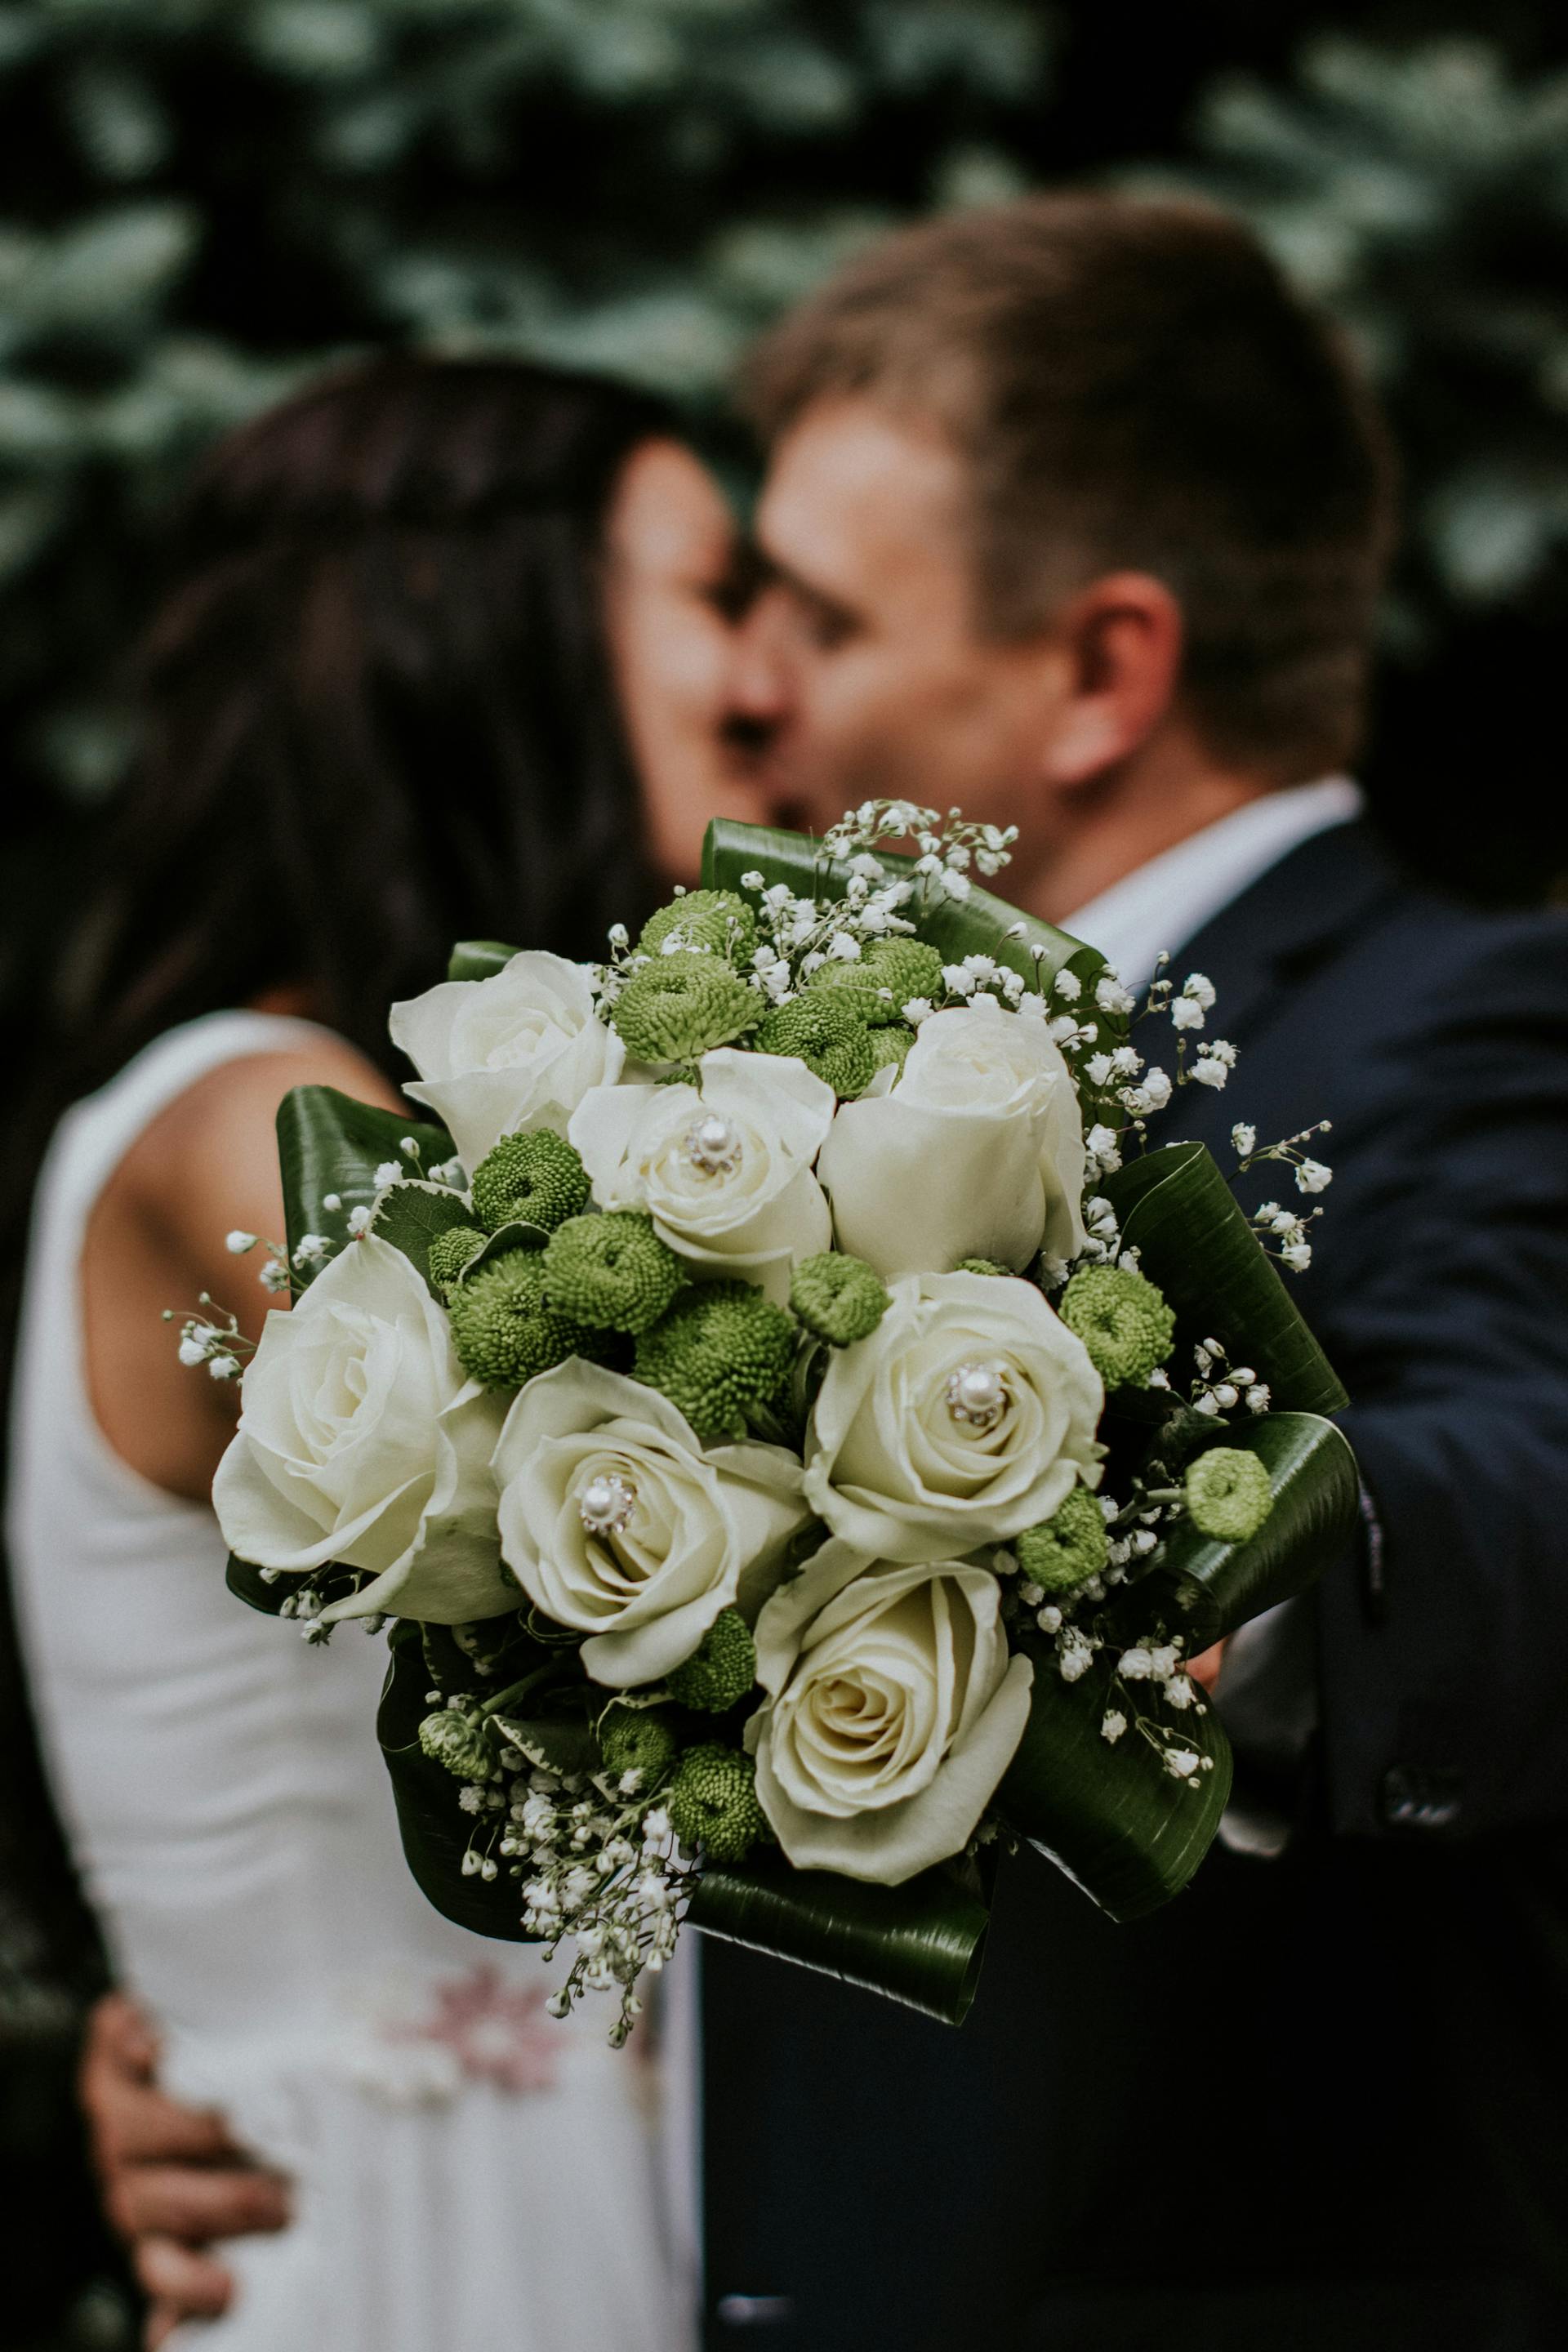 A bride and groom kissing | Source: Pexels